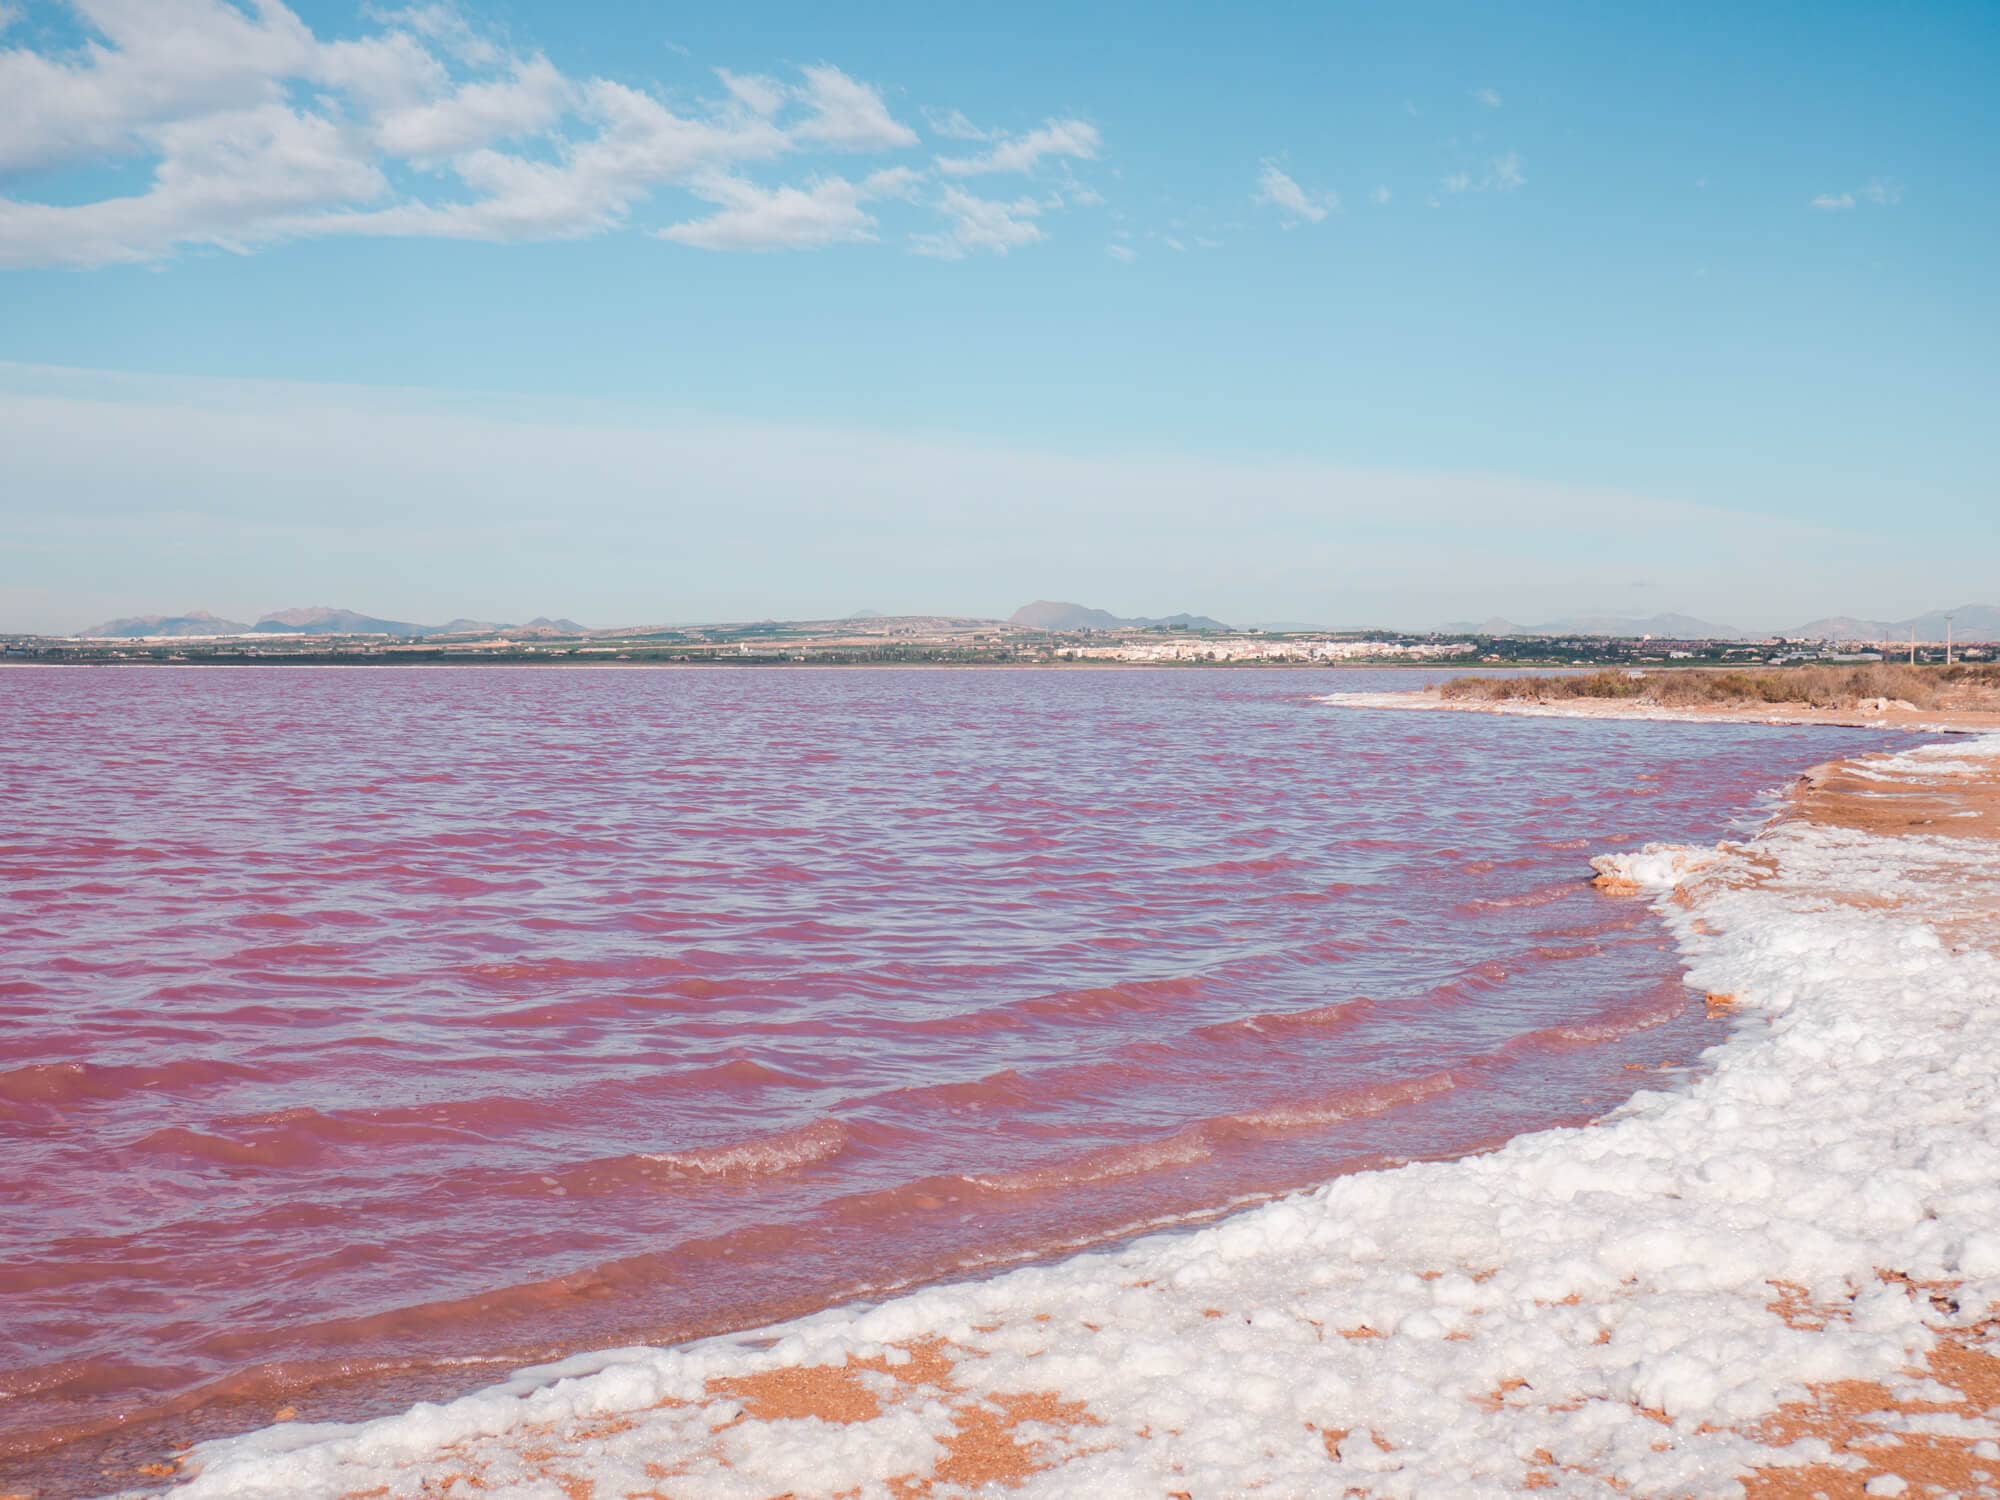 Join a bike tour of the Pink Lake in Torrevieja Spain